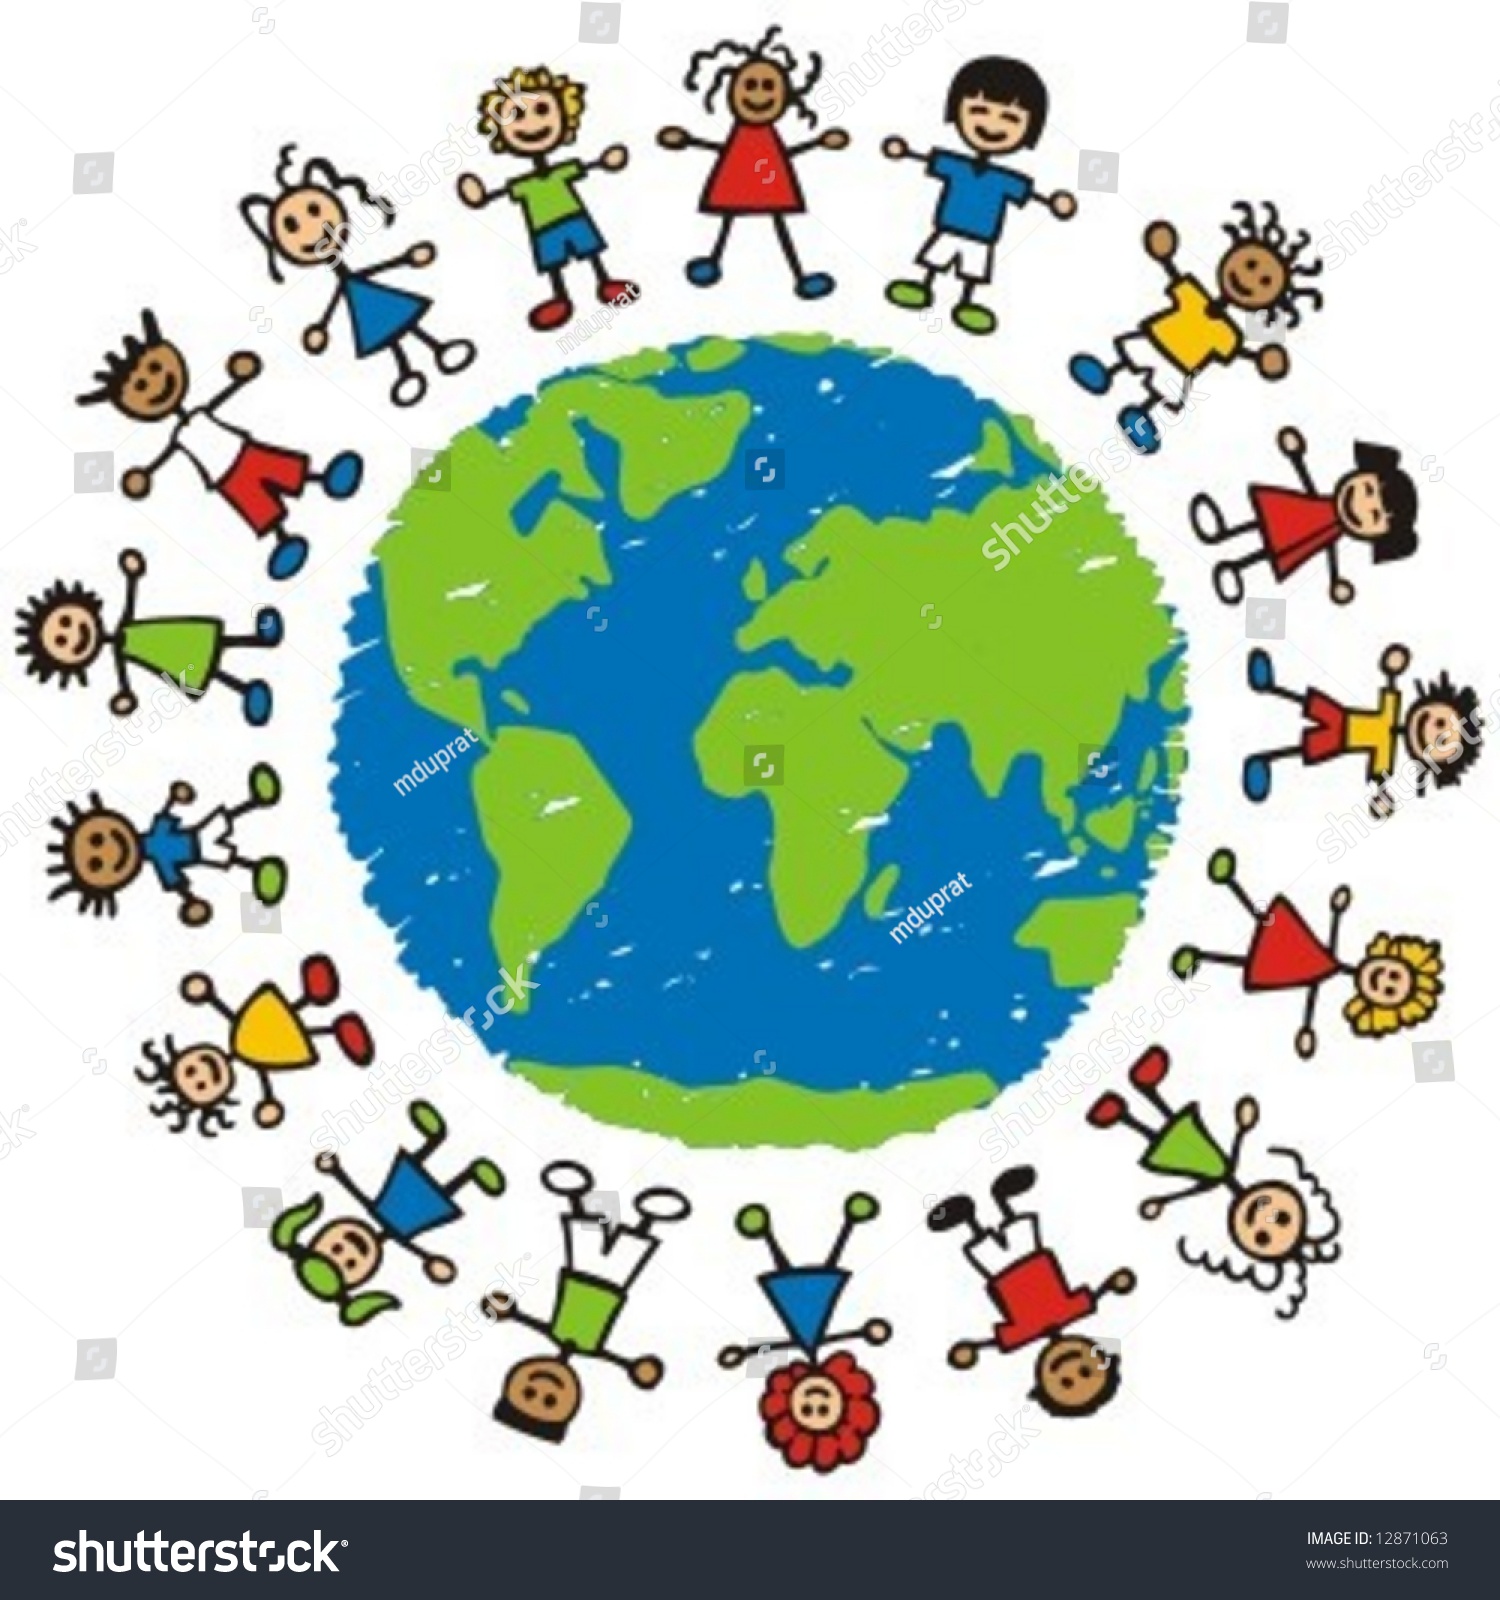 Children Of Different Races Hugging The Planet Earth. Stock Vector 